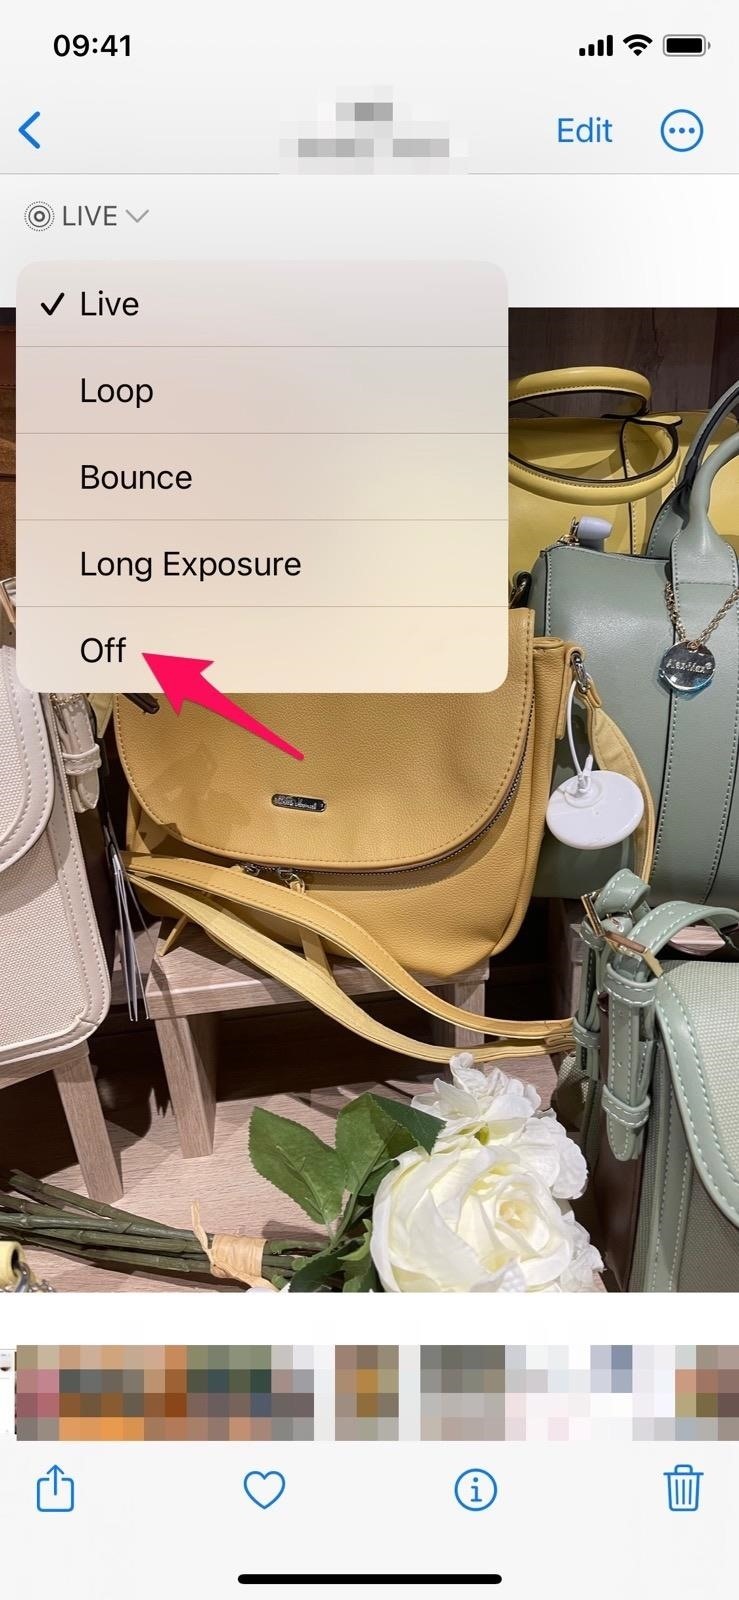 Apple Photos Has 21 New Features for iPhone That Make Your Life Easier